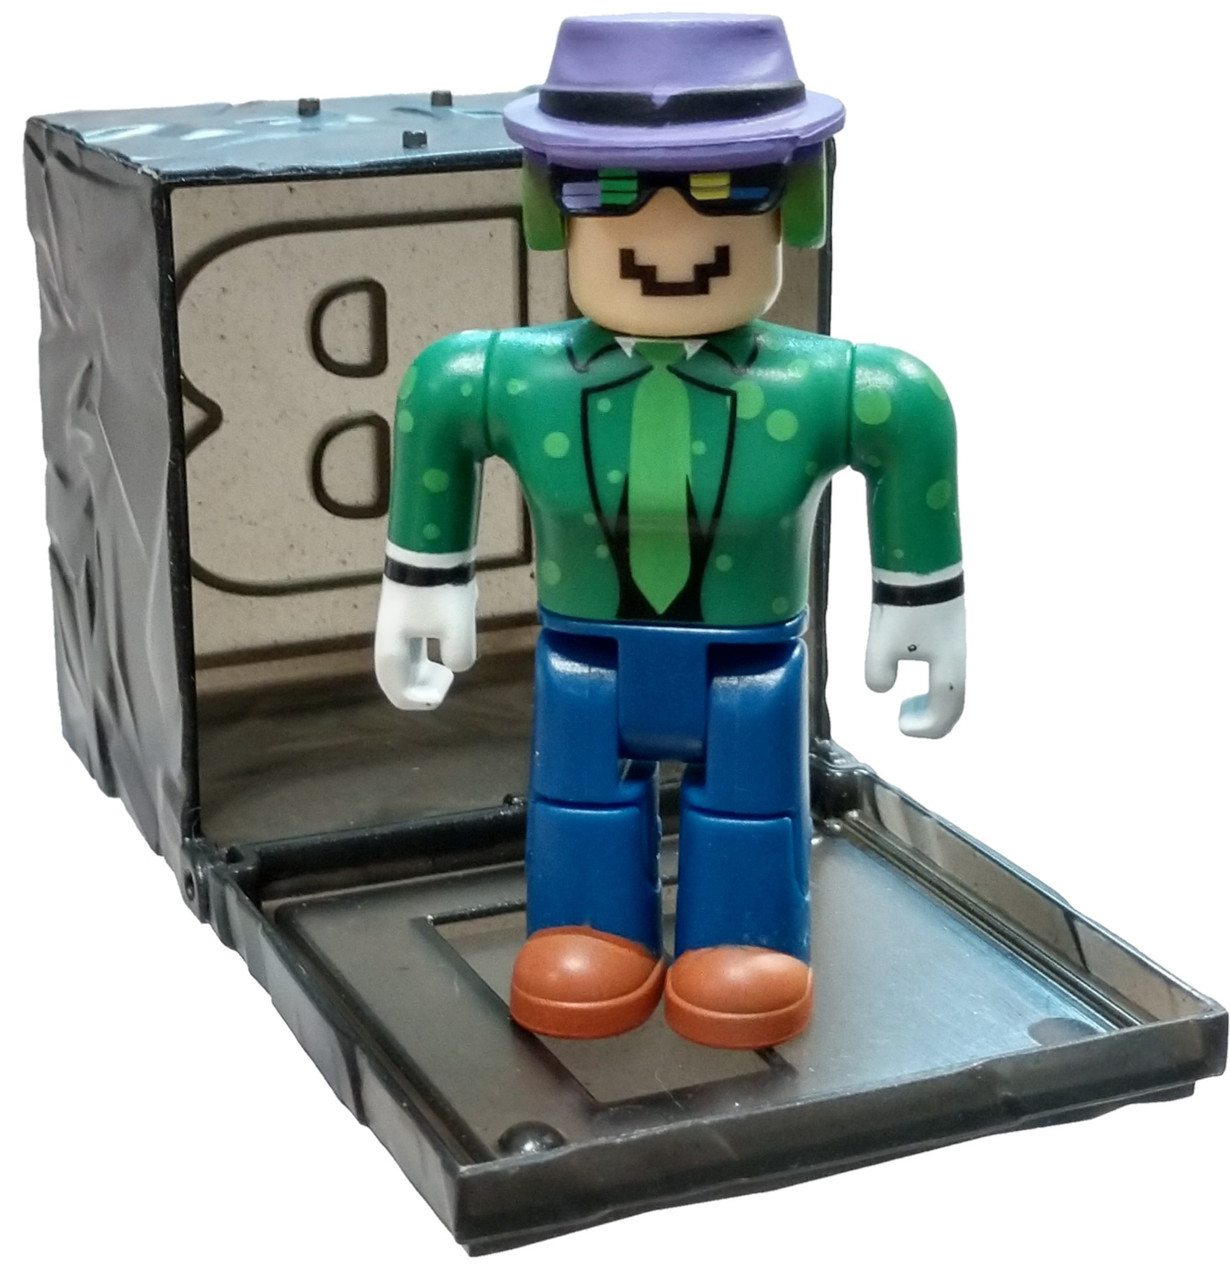 Roblox Series 7 Mrwindy 3 Mini Figure With Black Cube And Online Code Loose Jazwares Toywiz - guest world roblox the code vault